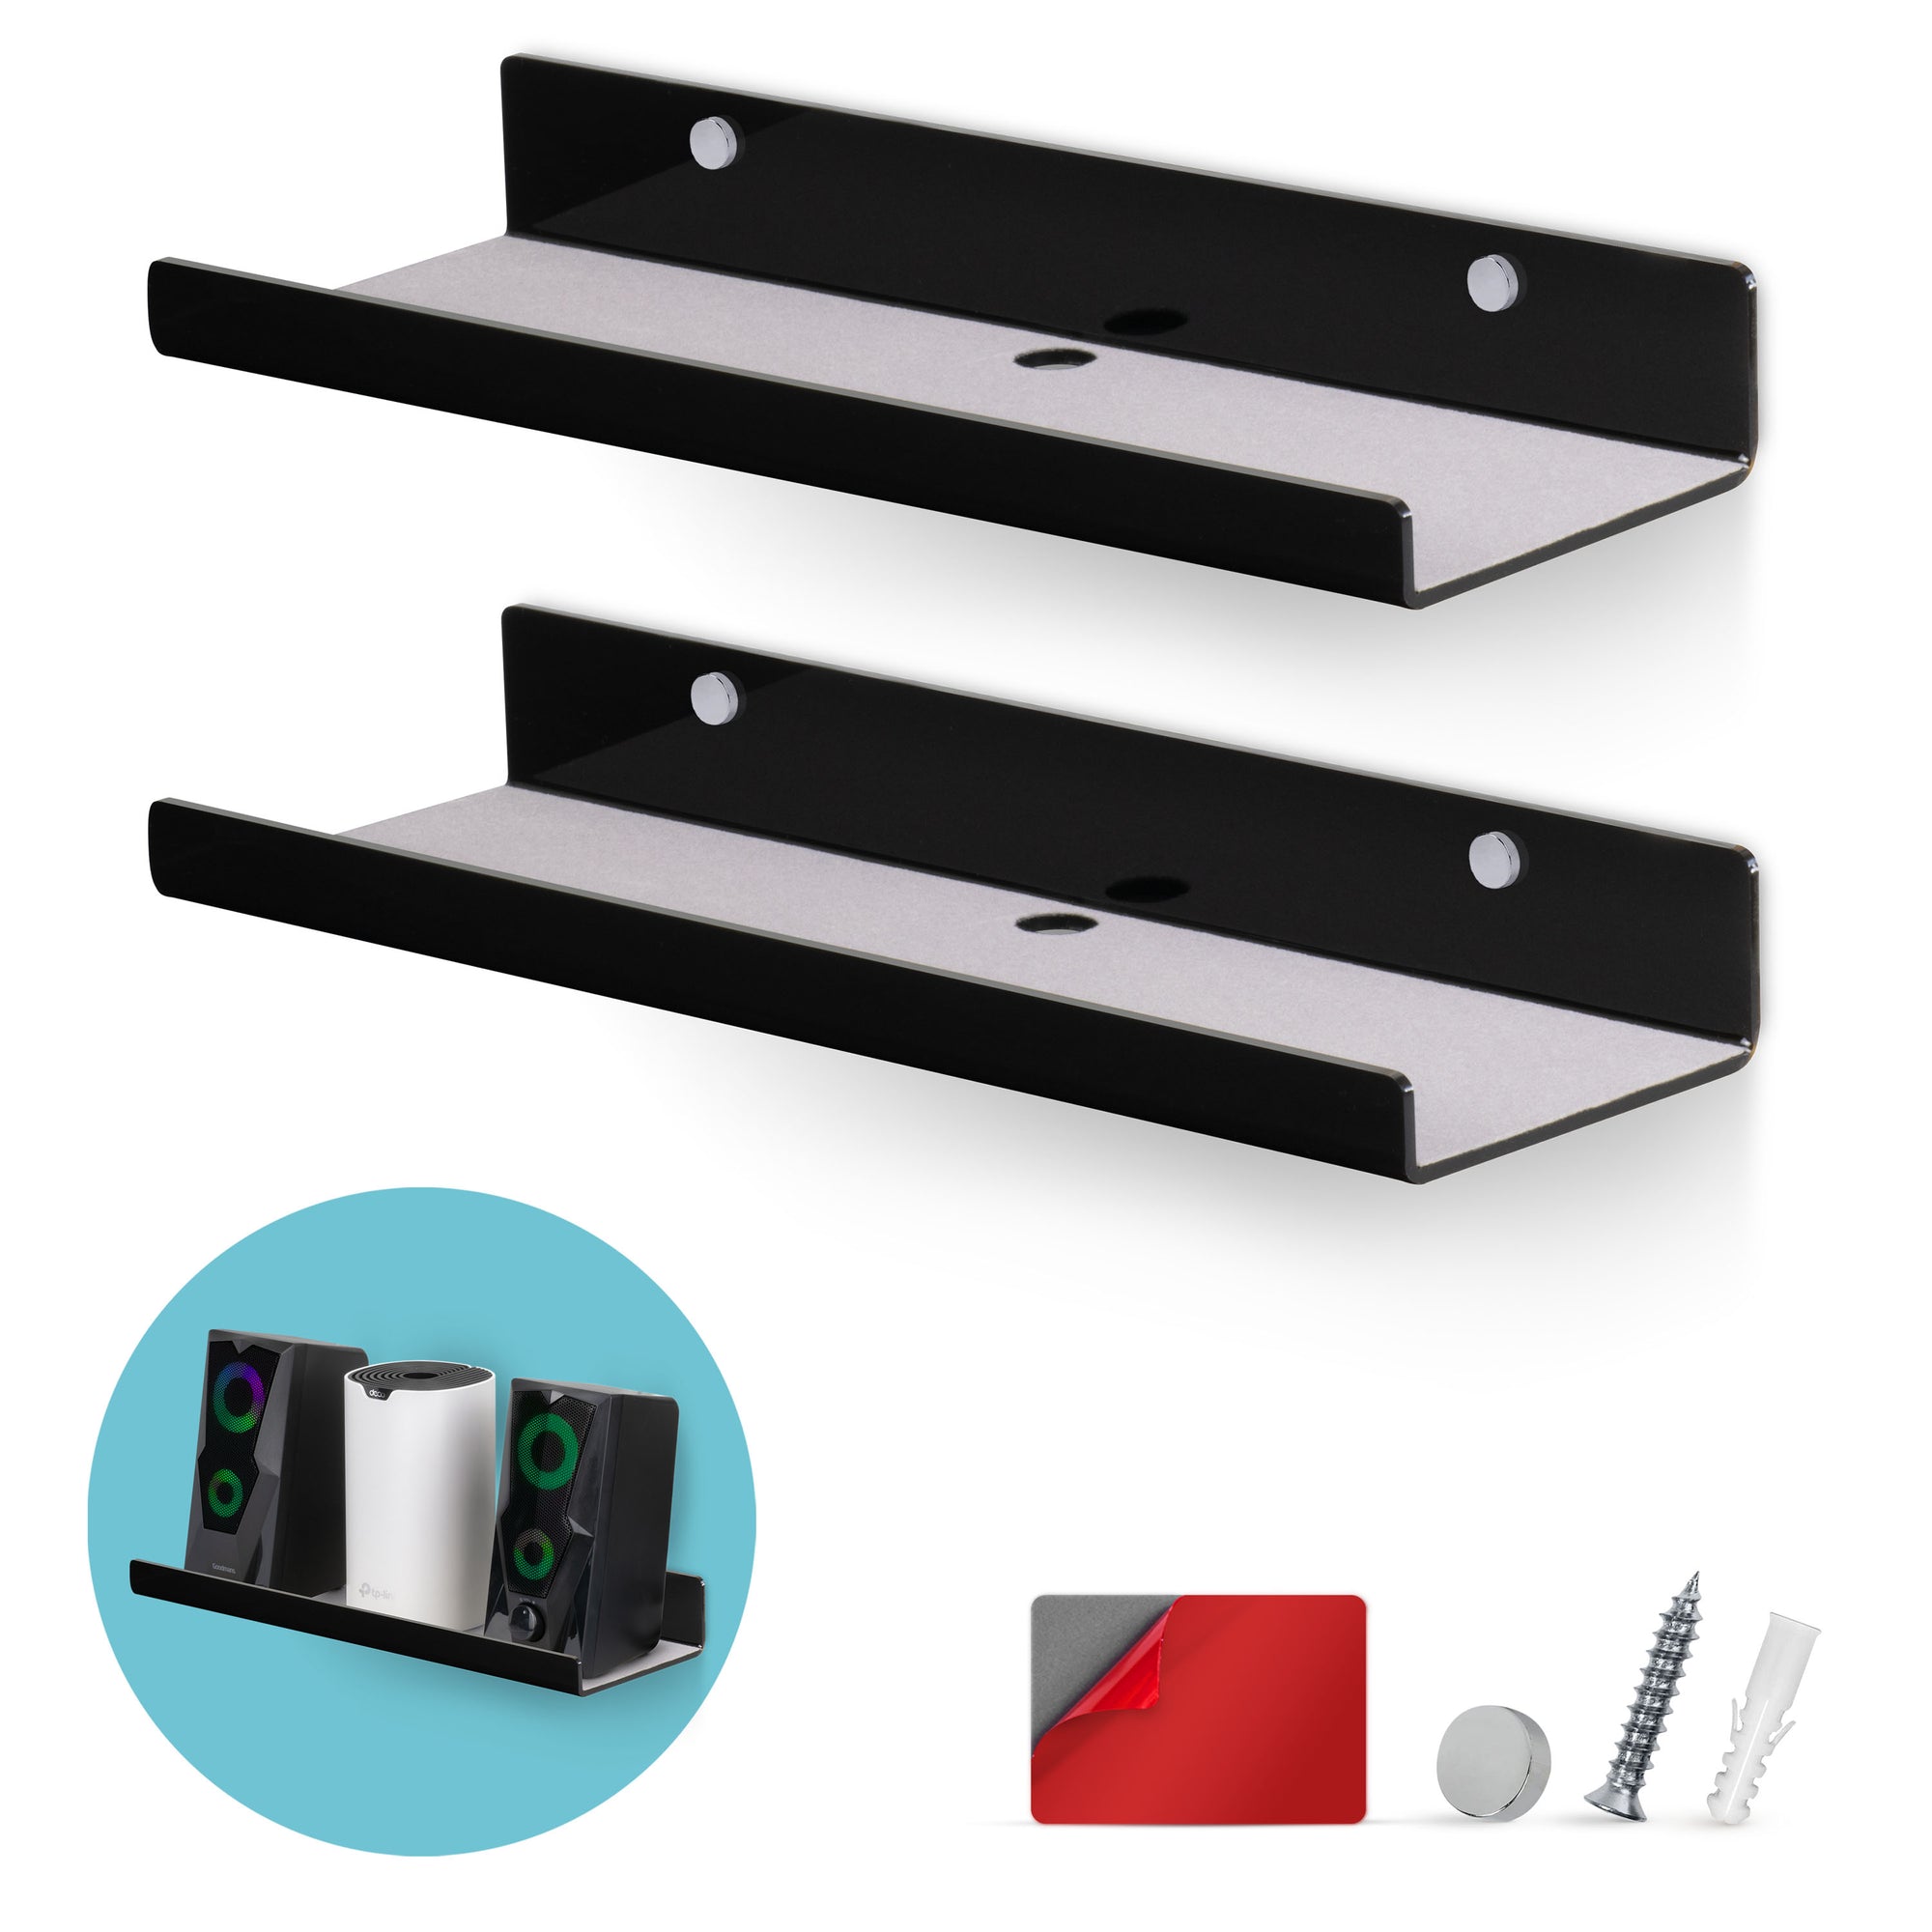 2-Pack 15" Floating Acrylic Wall Shelf for Speakers, Books, Decor, Plants, Cameras, Photos, Kitchen, Bathroom, Routers & More Universal Small Holder Shelves